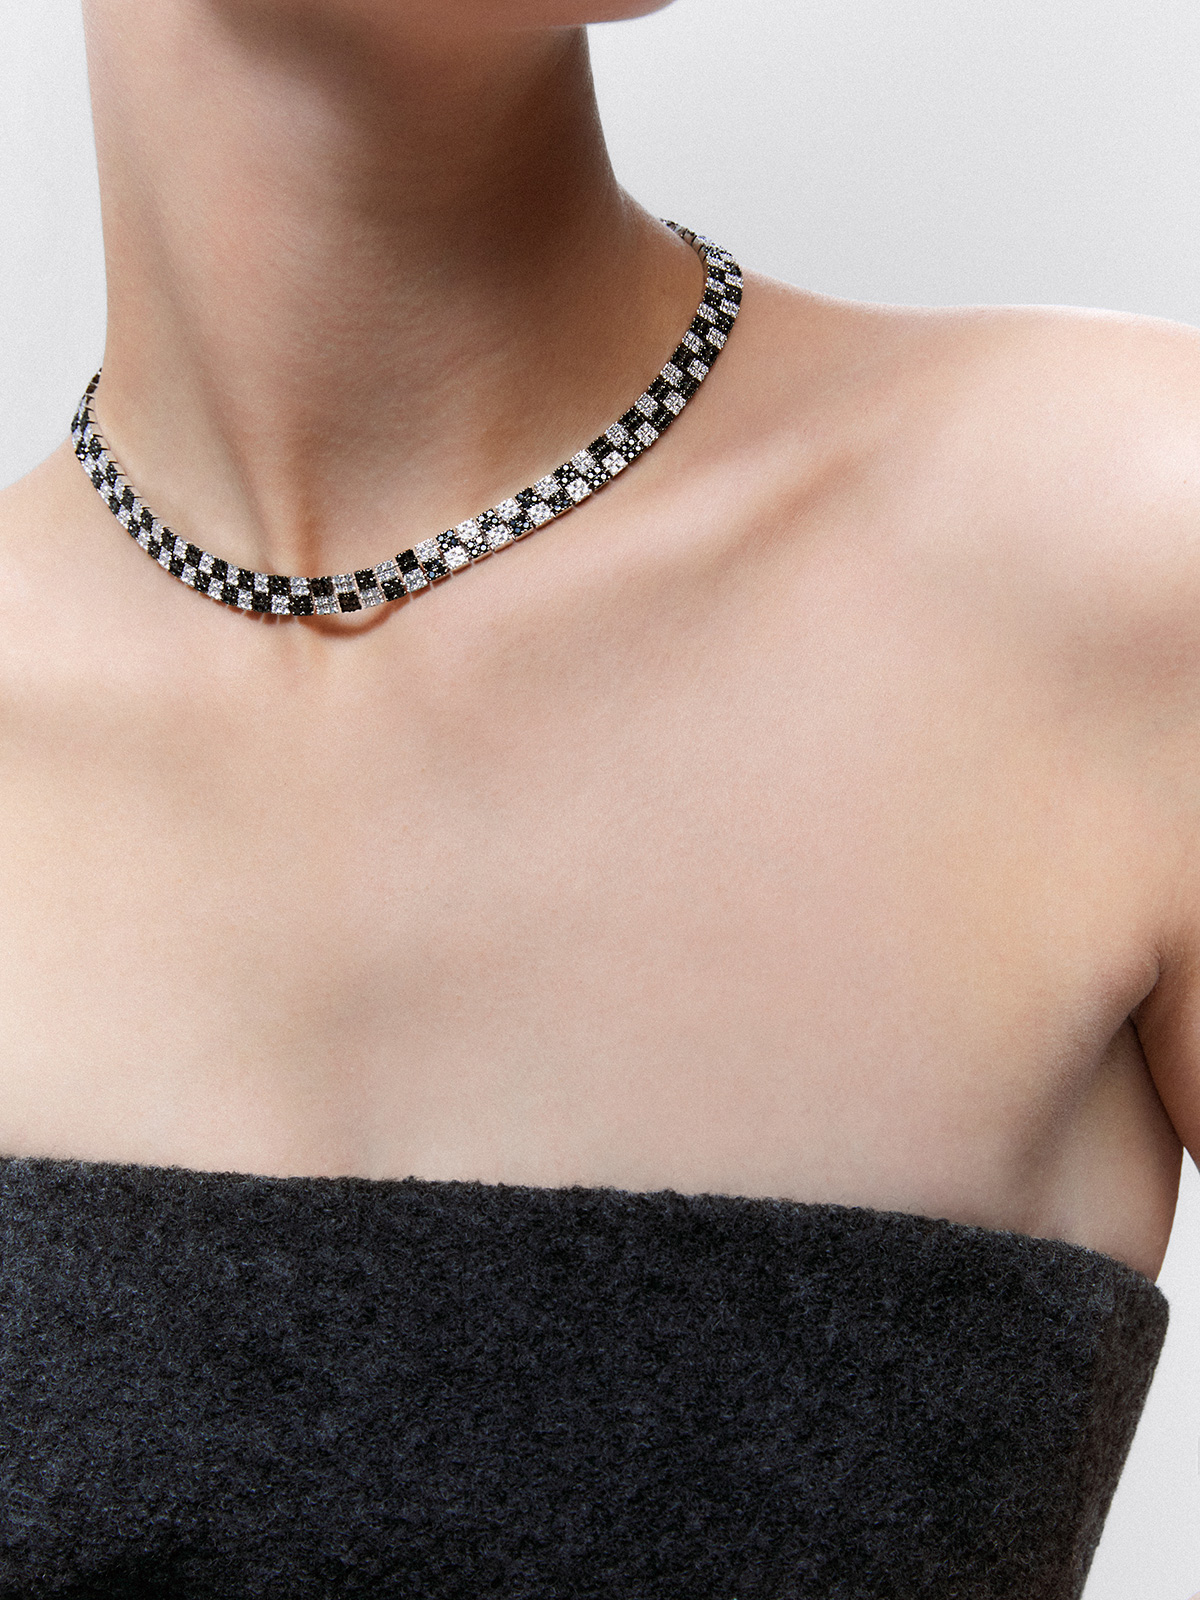 18kt white gold necklace with black and white diamond geometric motifs.